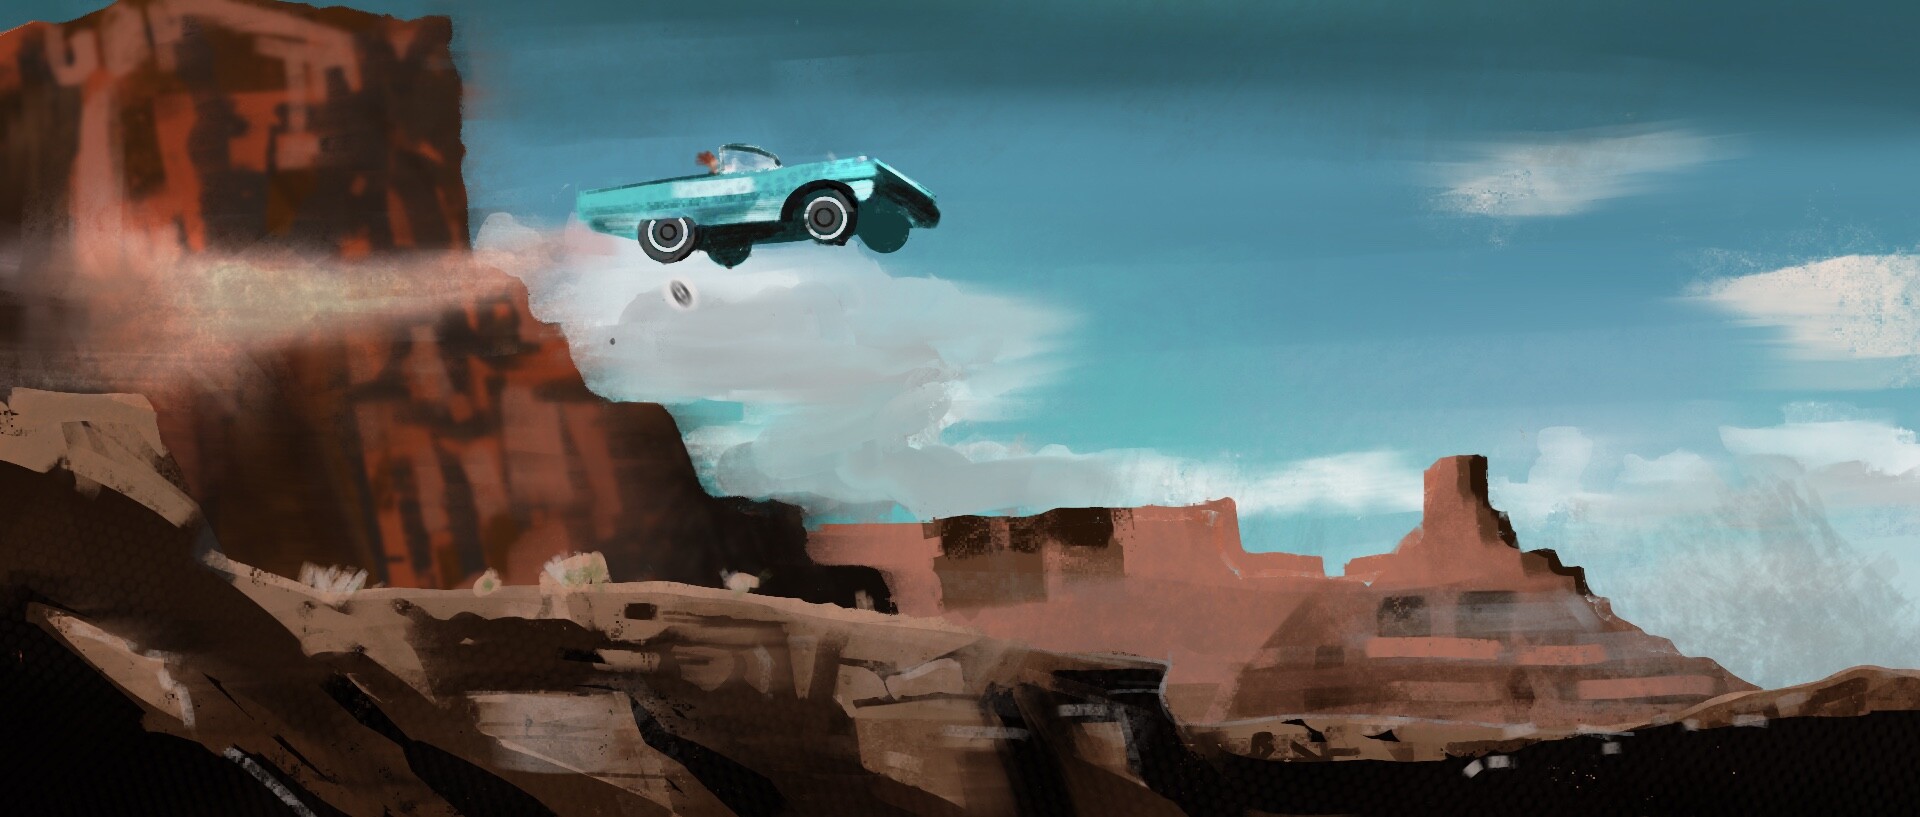 Thelma and Louise on Behance